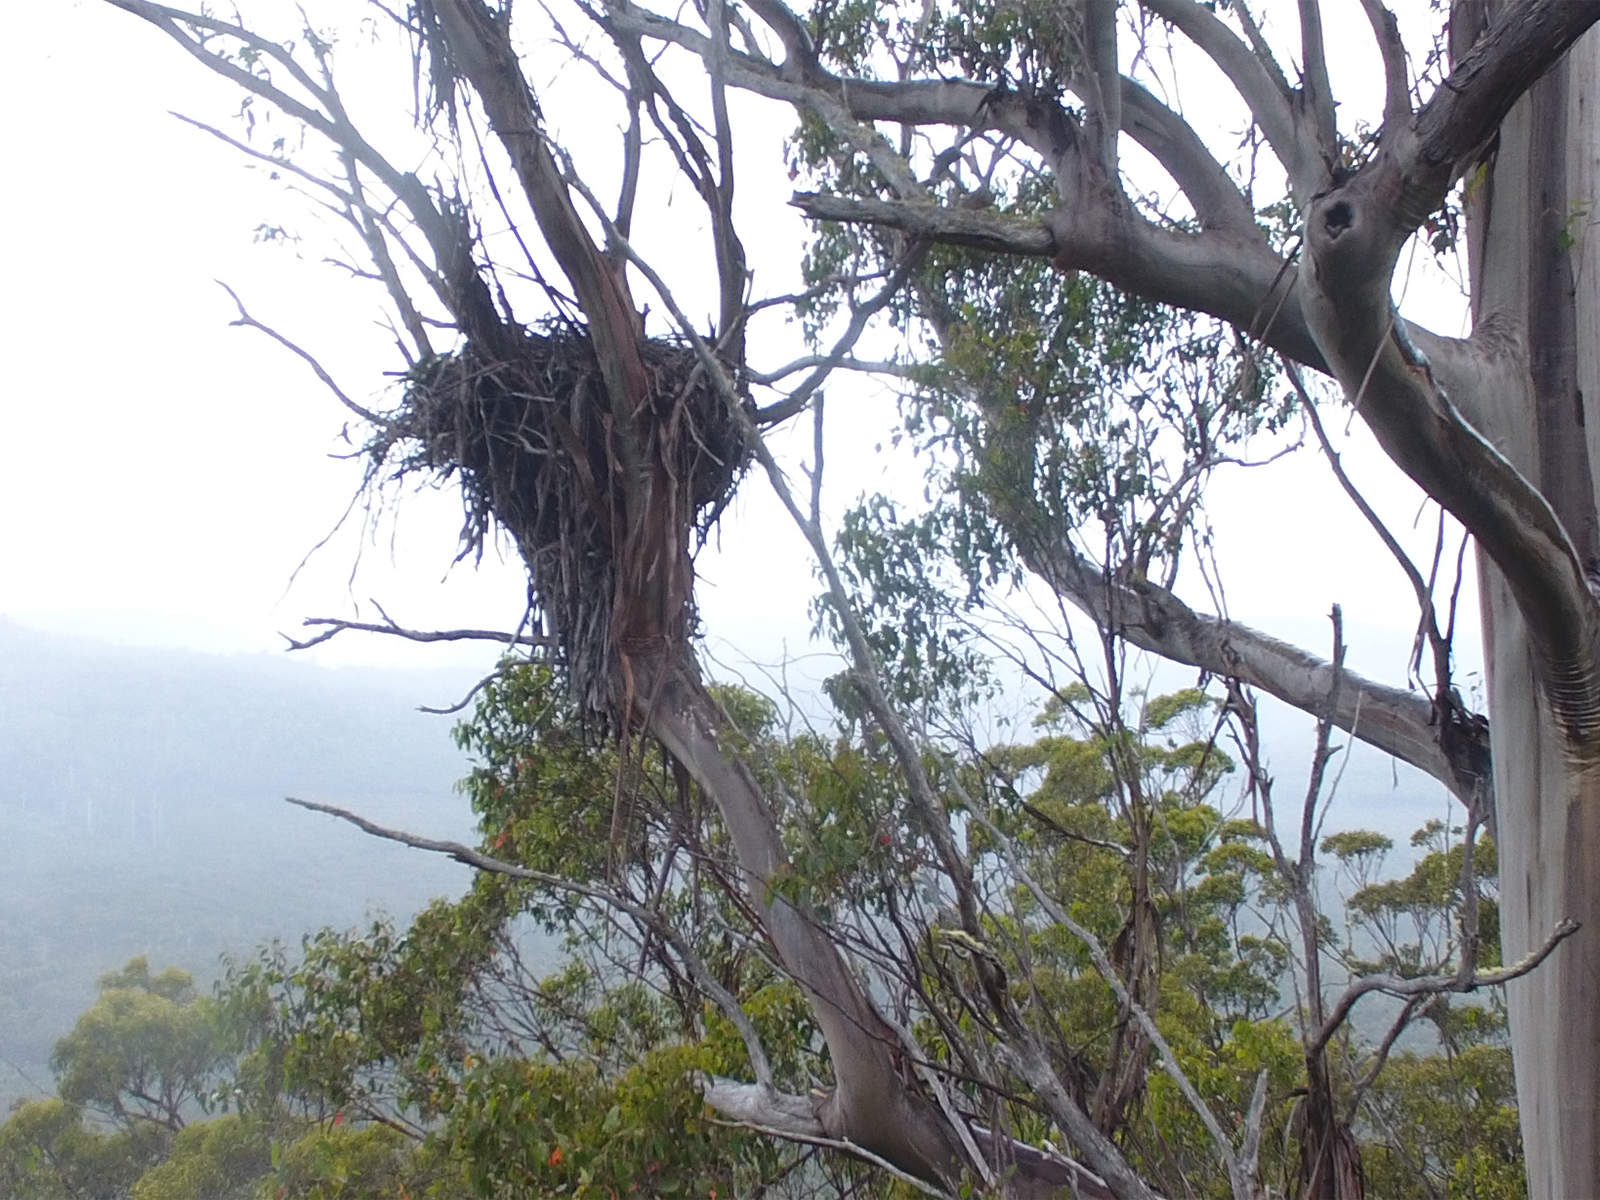 An eagle nest in the fork of a large eucalypt tree. It is perhaps more than 1 m diameter—nests can get even bigger than this. Never approach a nest within 1000 m line of sight during the breeding season (approximately June/July to January/February). Photo: James Pay.